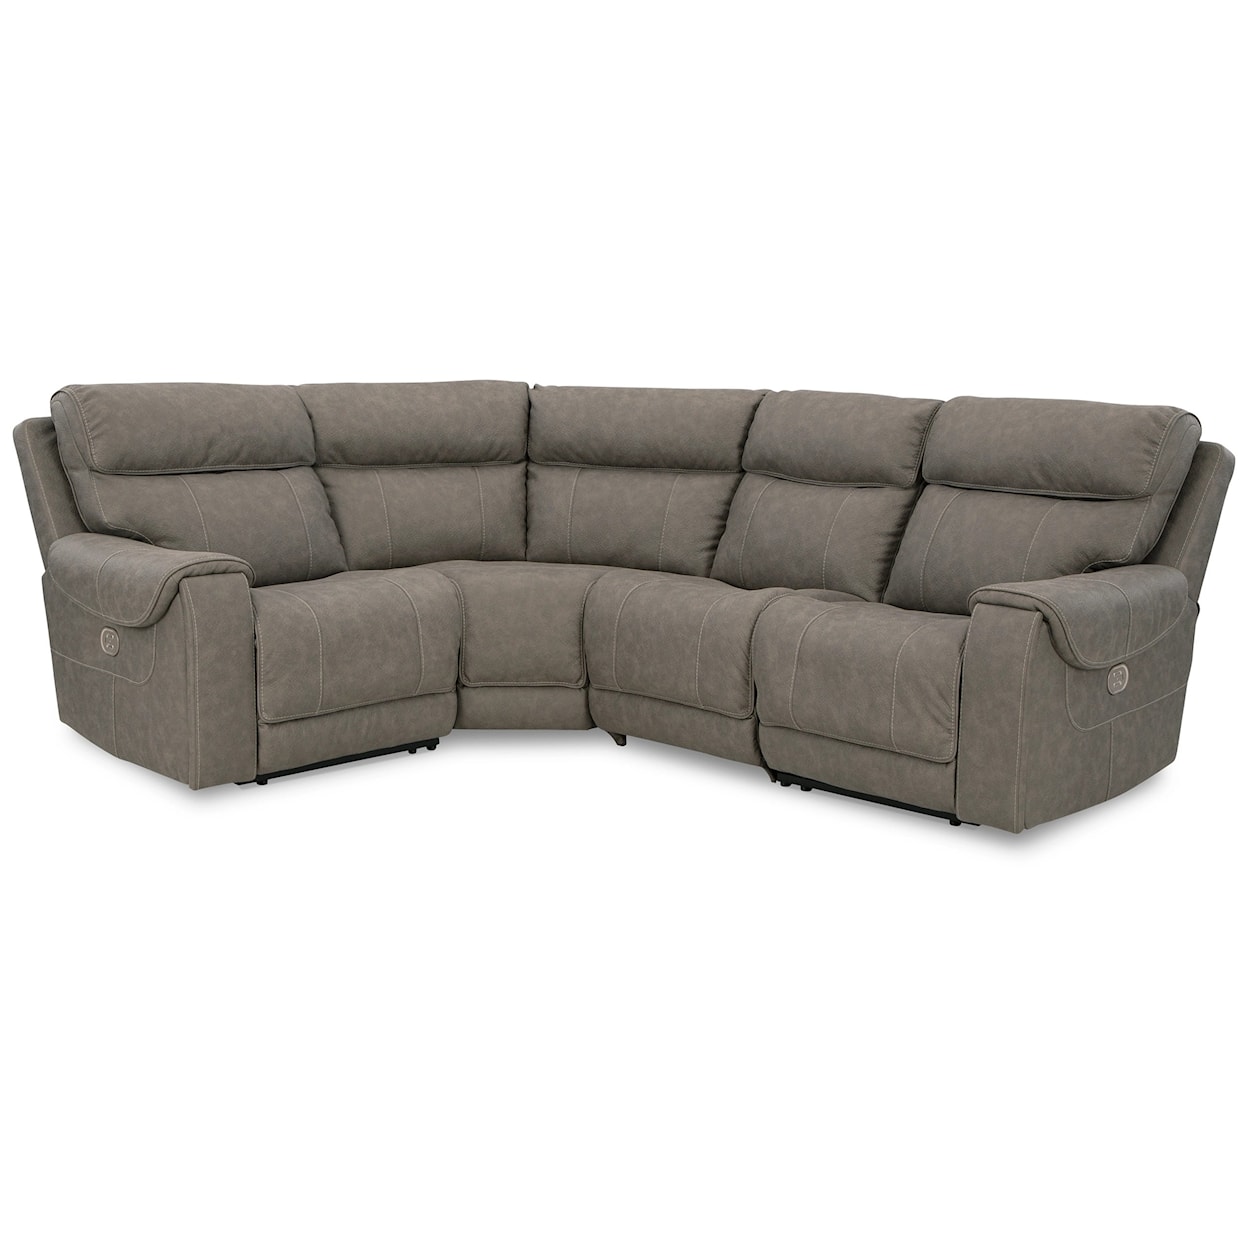 Benchcraft Starbot 4-Piece Power Reclining Sectional